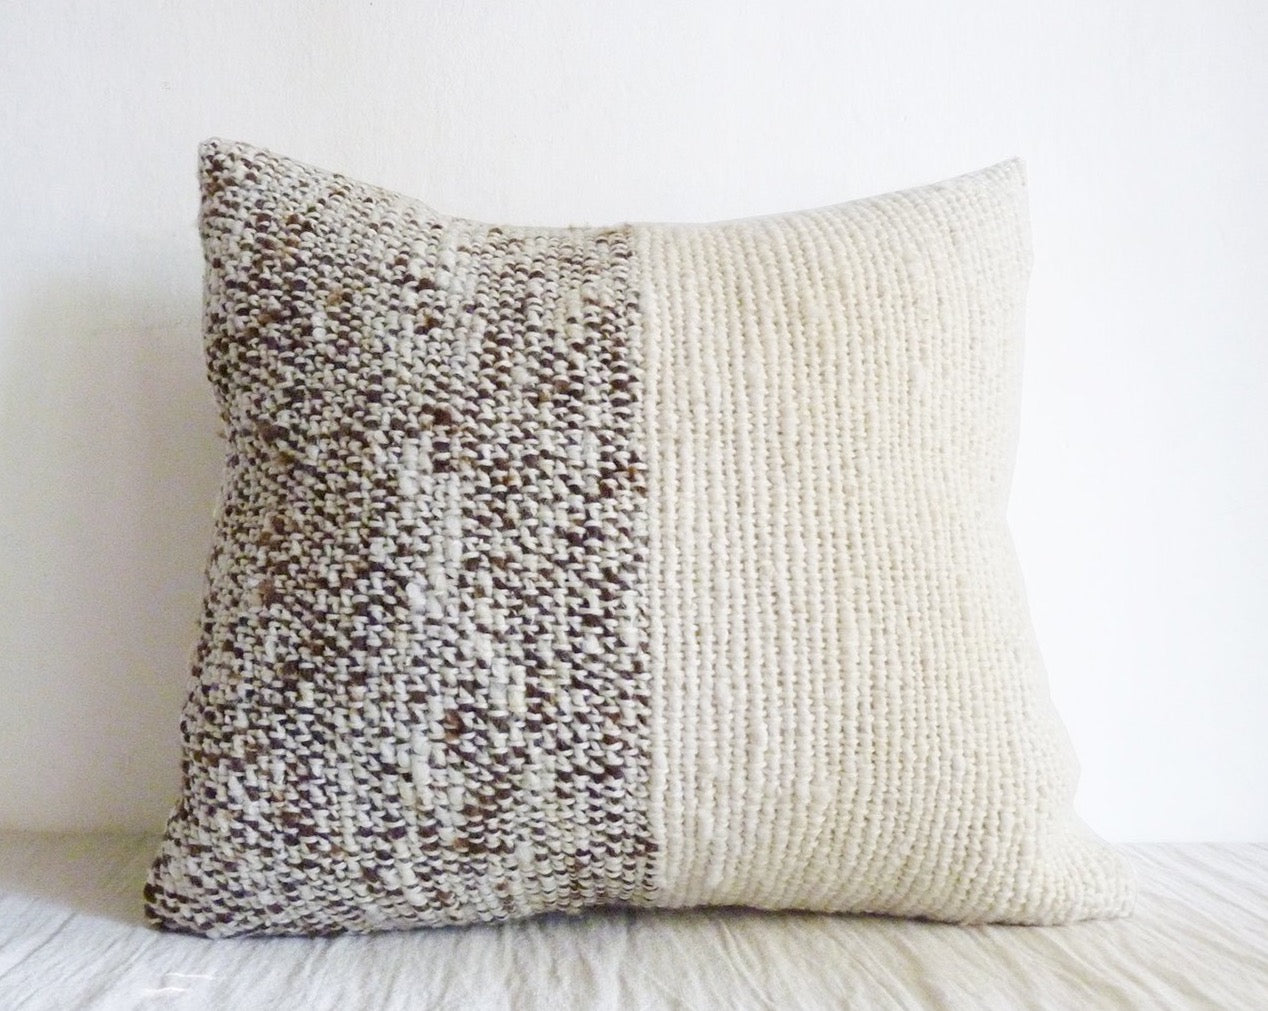 Pillow Cover in Brown & Ivory Organic Sheep Wool Bicolor